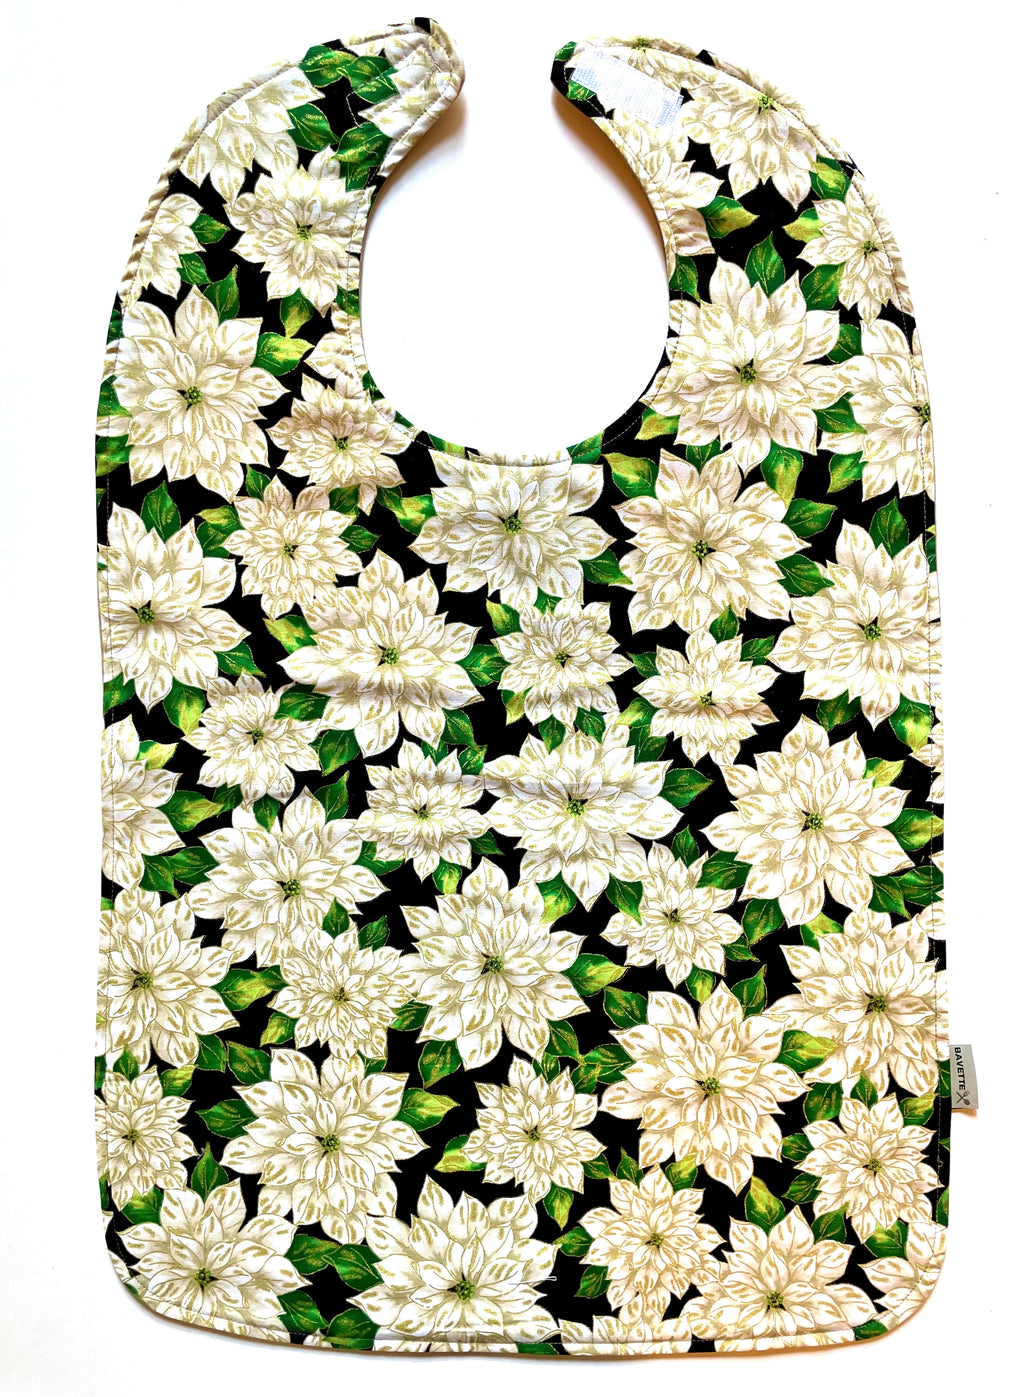 White Poinsettias premium cotton adult clothing protector by BAVETTE Bibs.